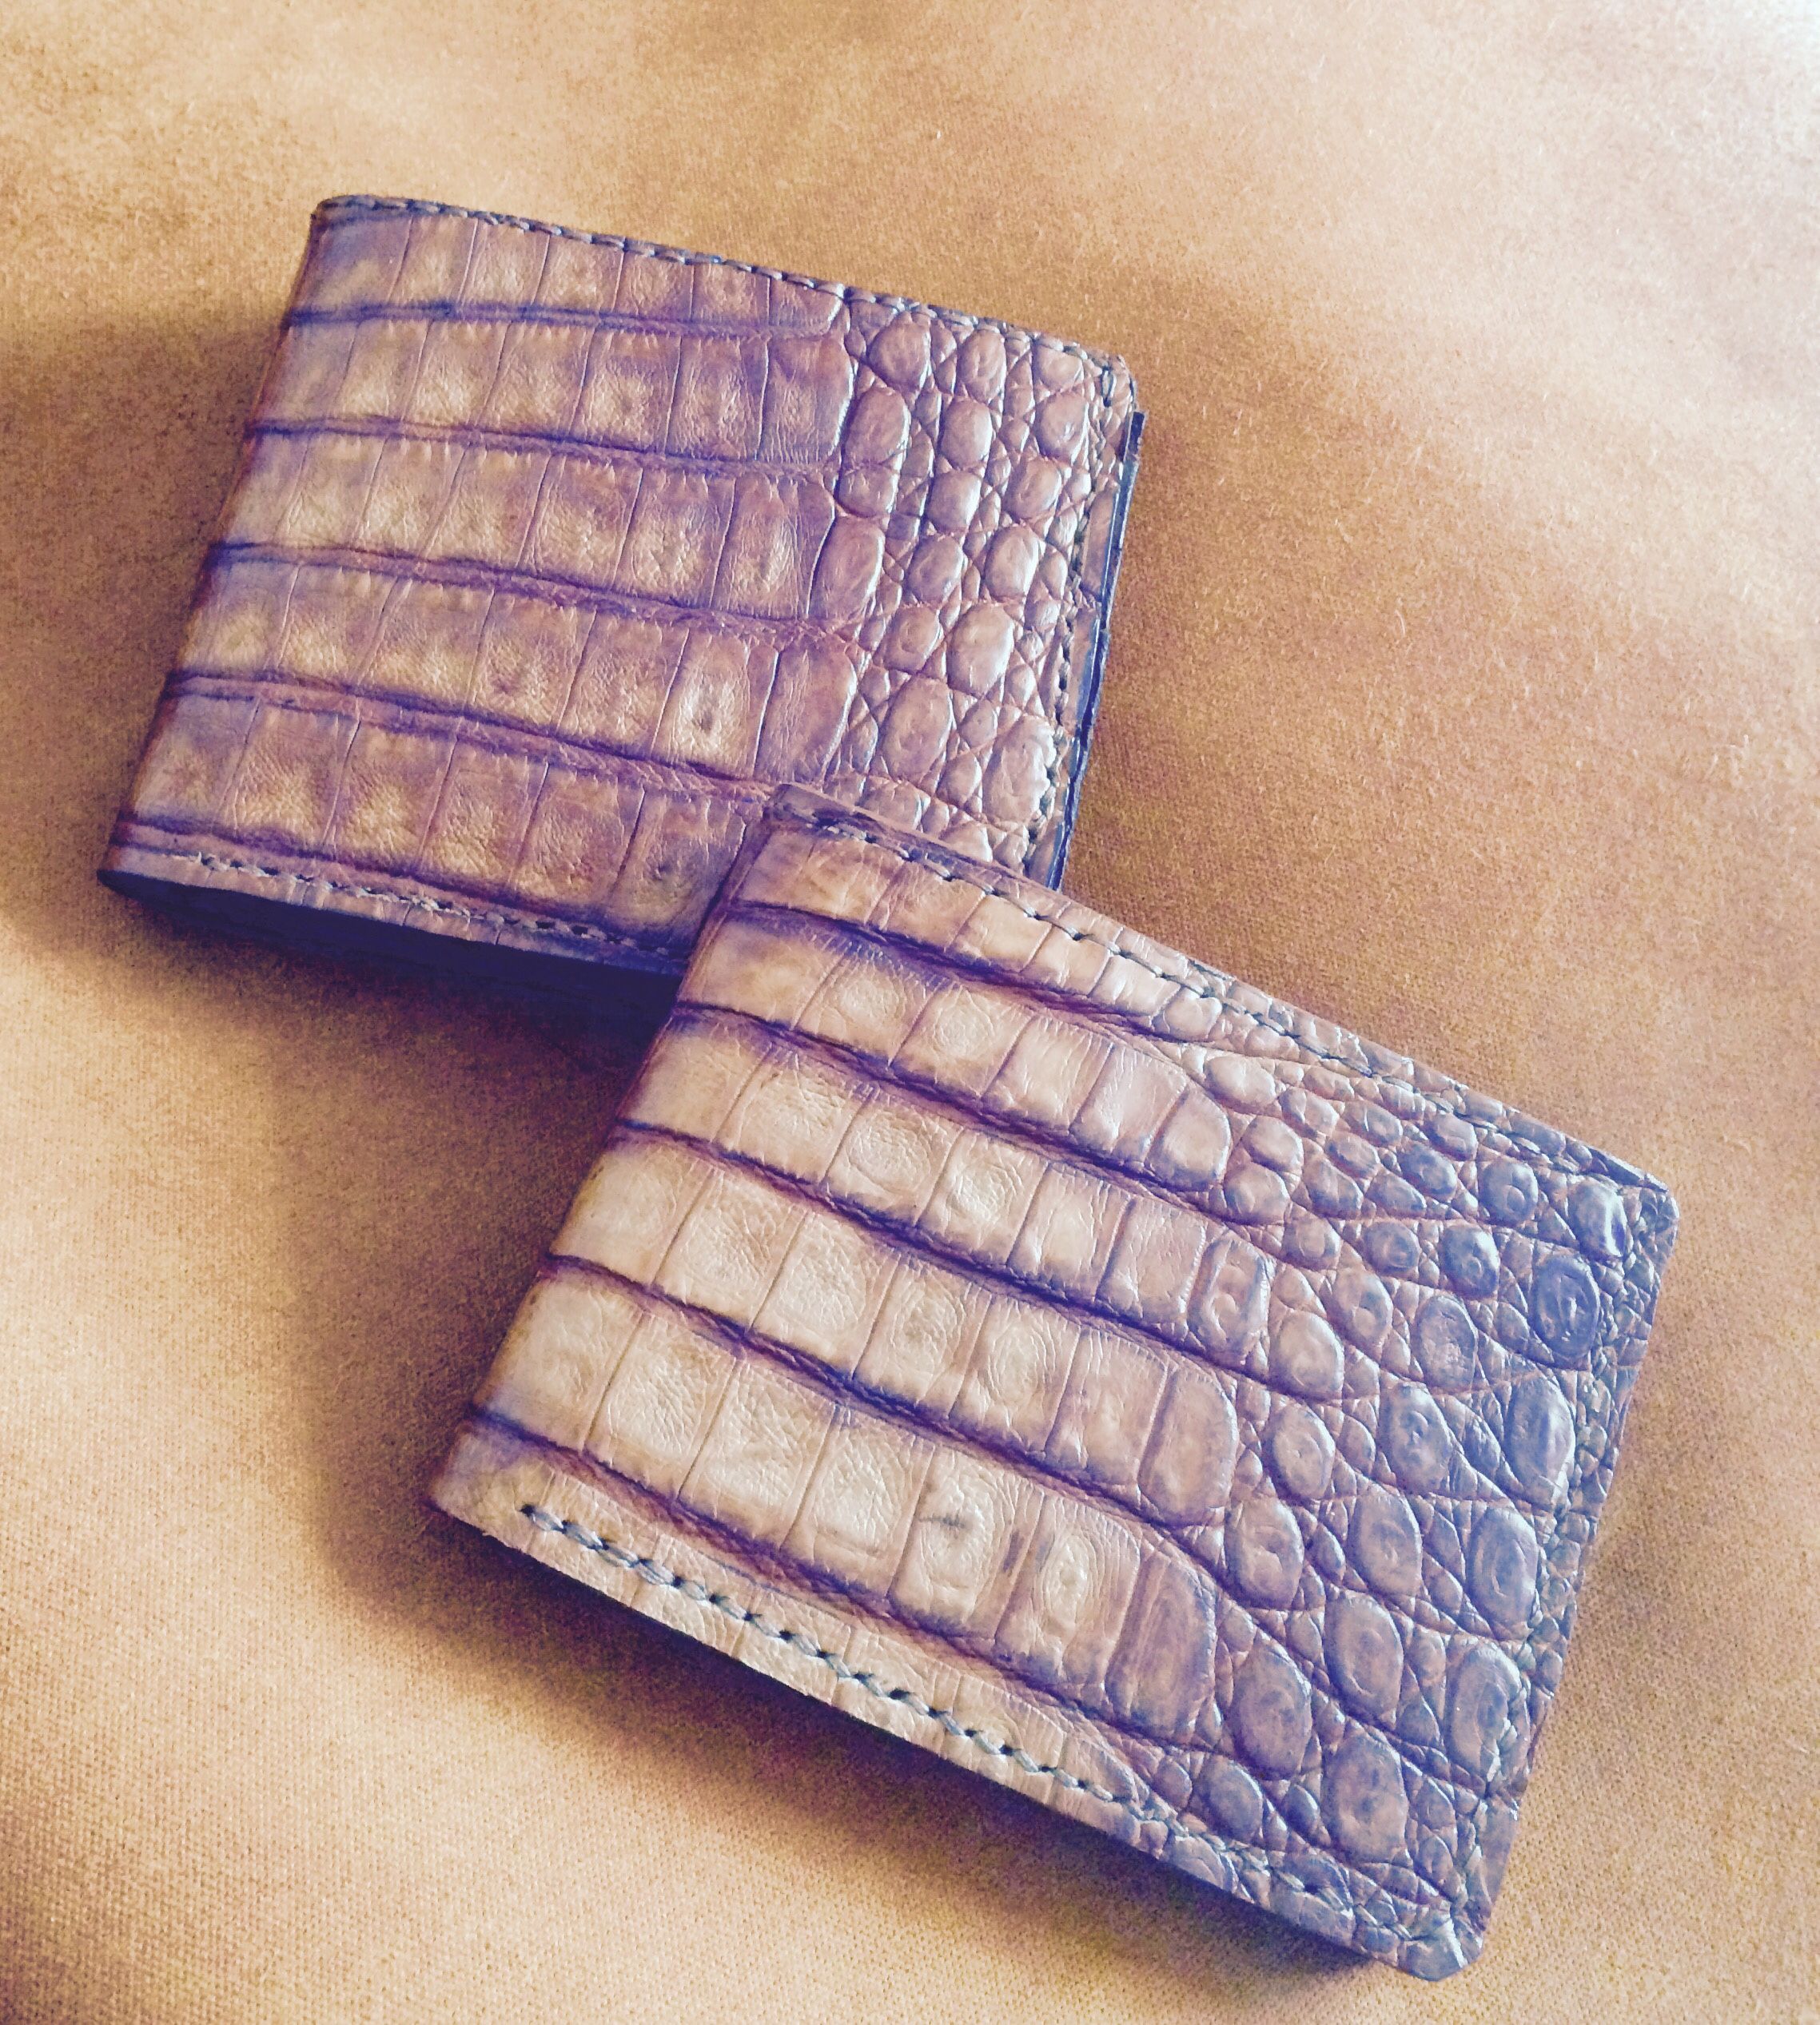 exotic leather wallets